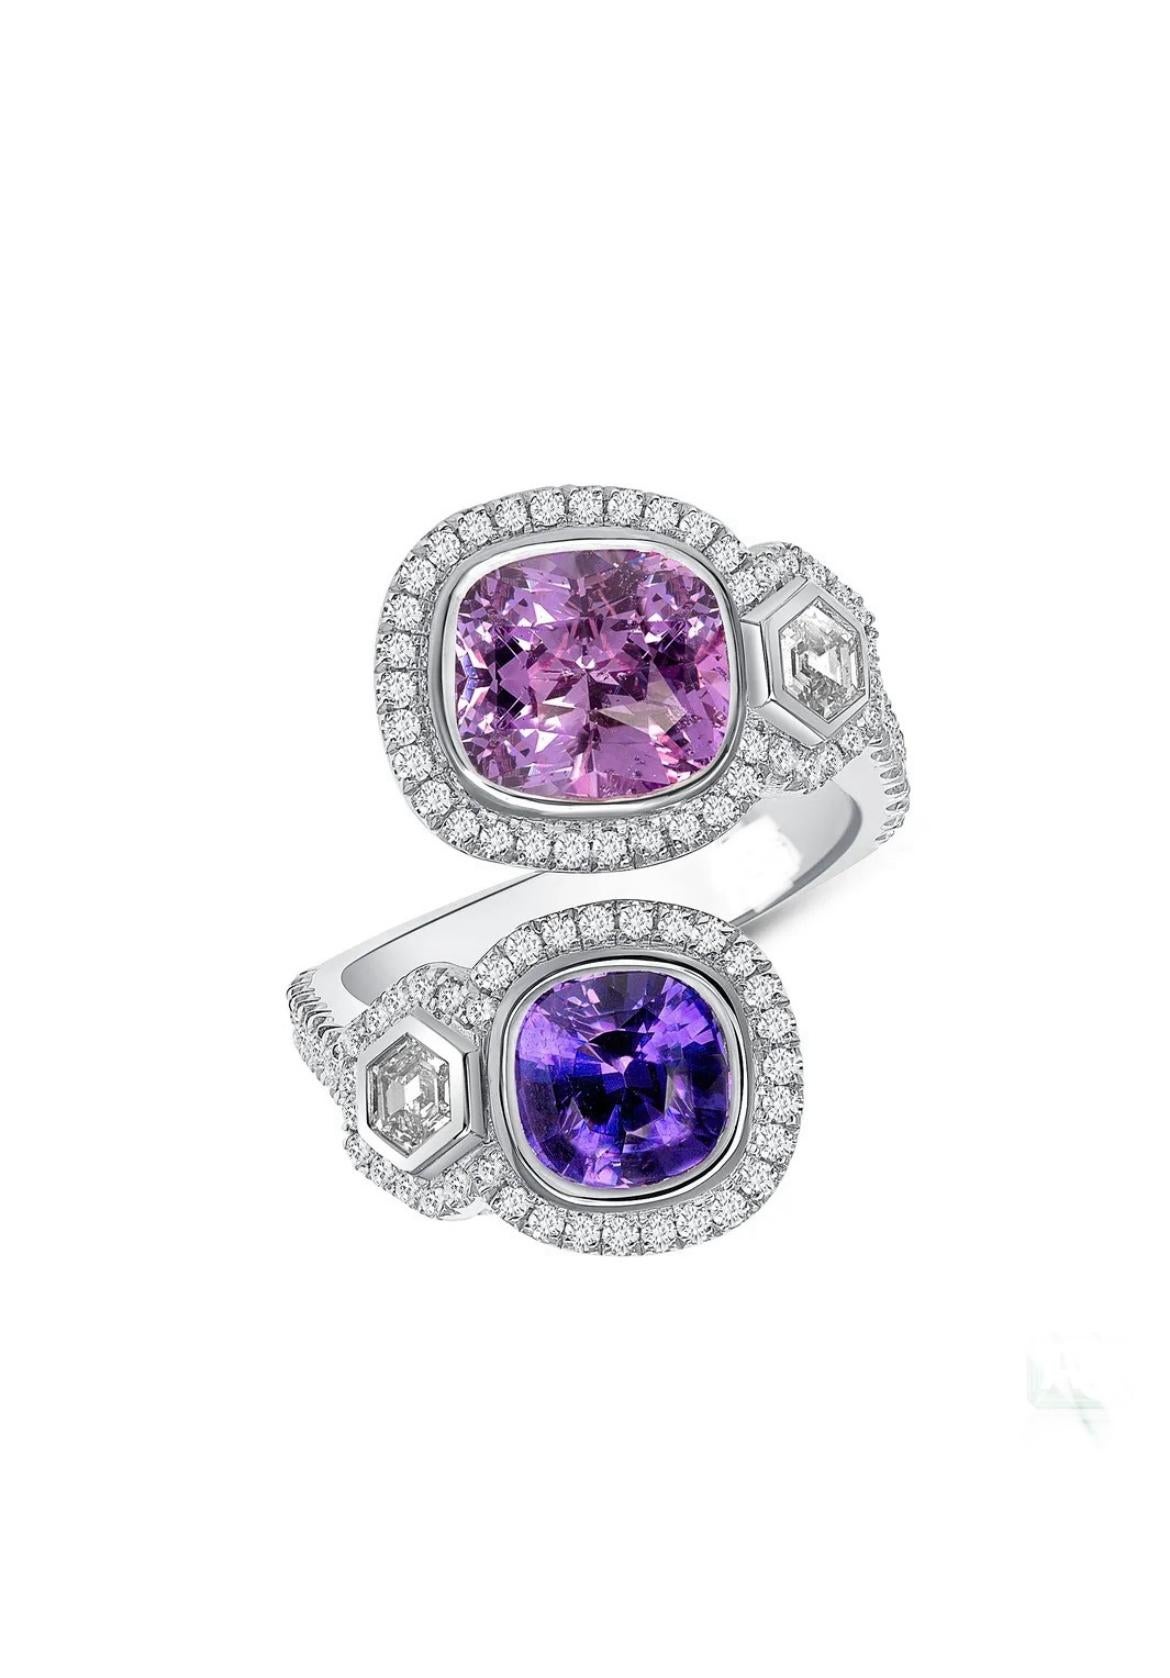 3.19ct Ceylon pink sapphire is paired with 1.90ct Ceylon purple sapphire, highlighted by two hexagonal-cut diamonds weighing a total of 0.30ct and round white diamonds weighing a total of 0.38ct, crafted in our intricate platinum setting.

These